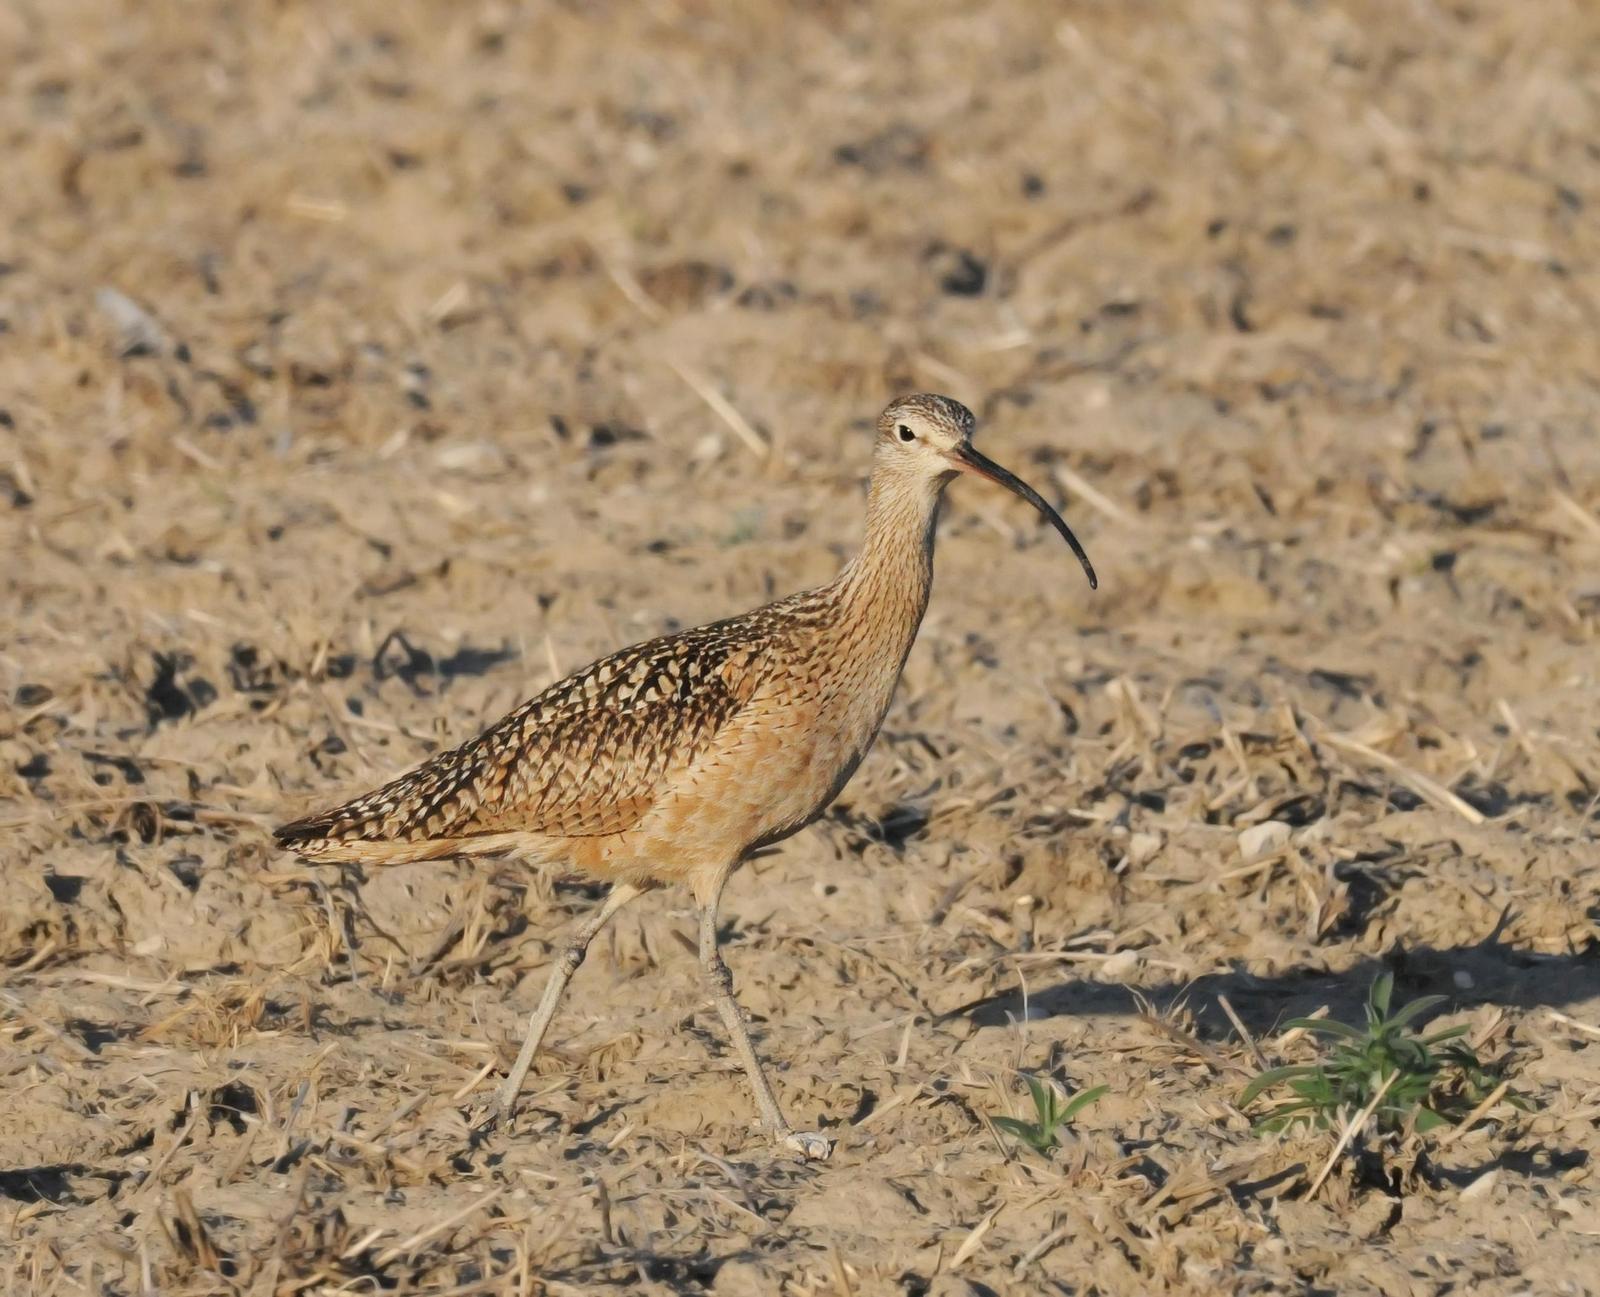 Long-billed Curlew Photo by Steven Mlodinow